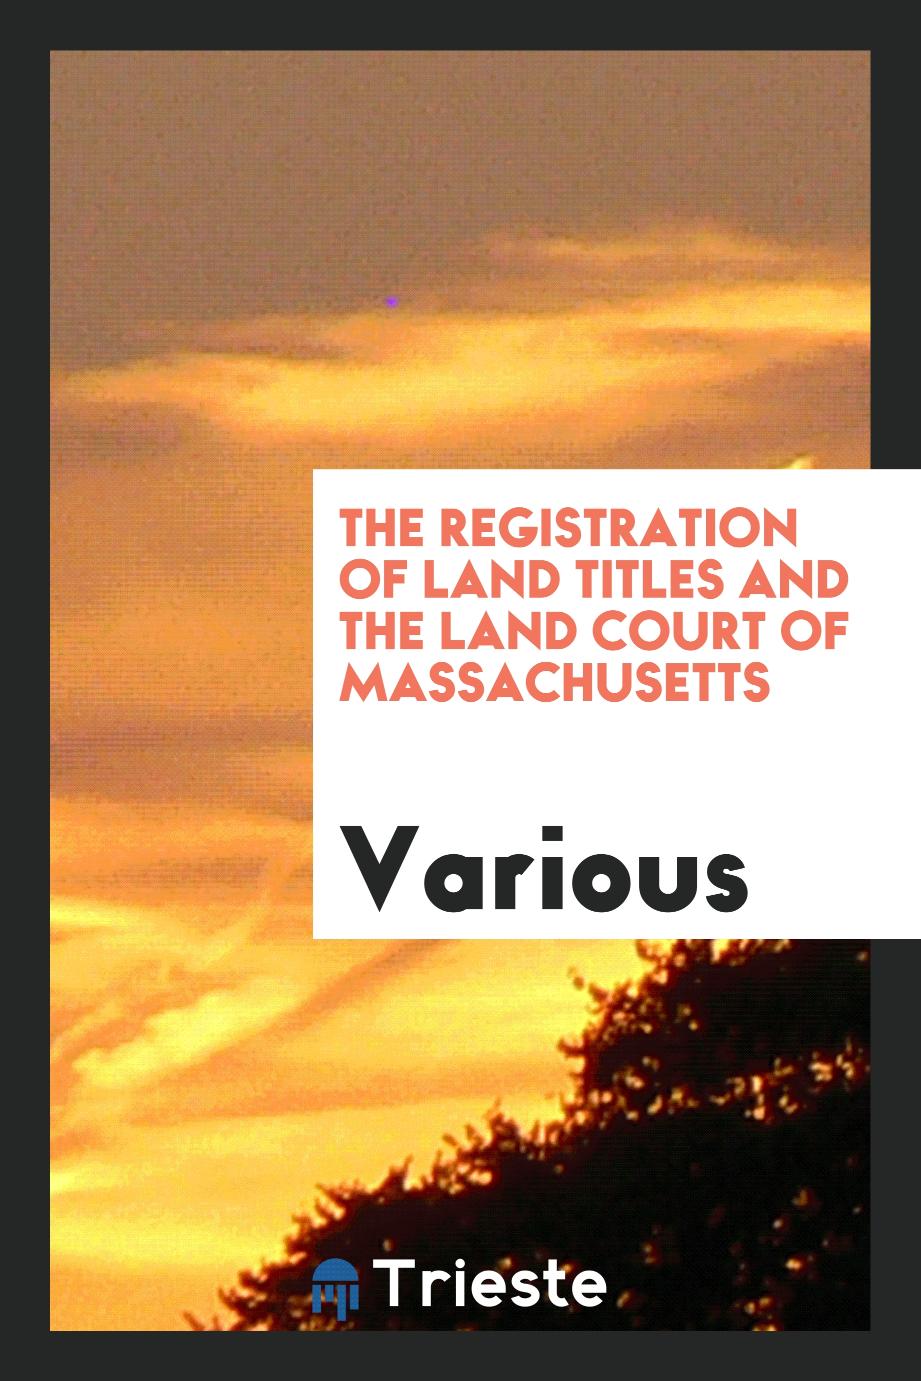 The Registration of Land Titles and the Land Court of Massachusetts